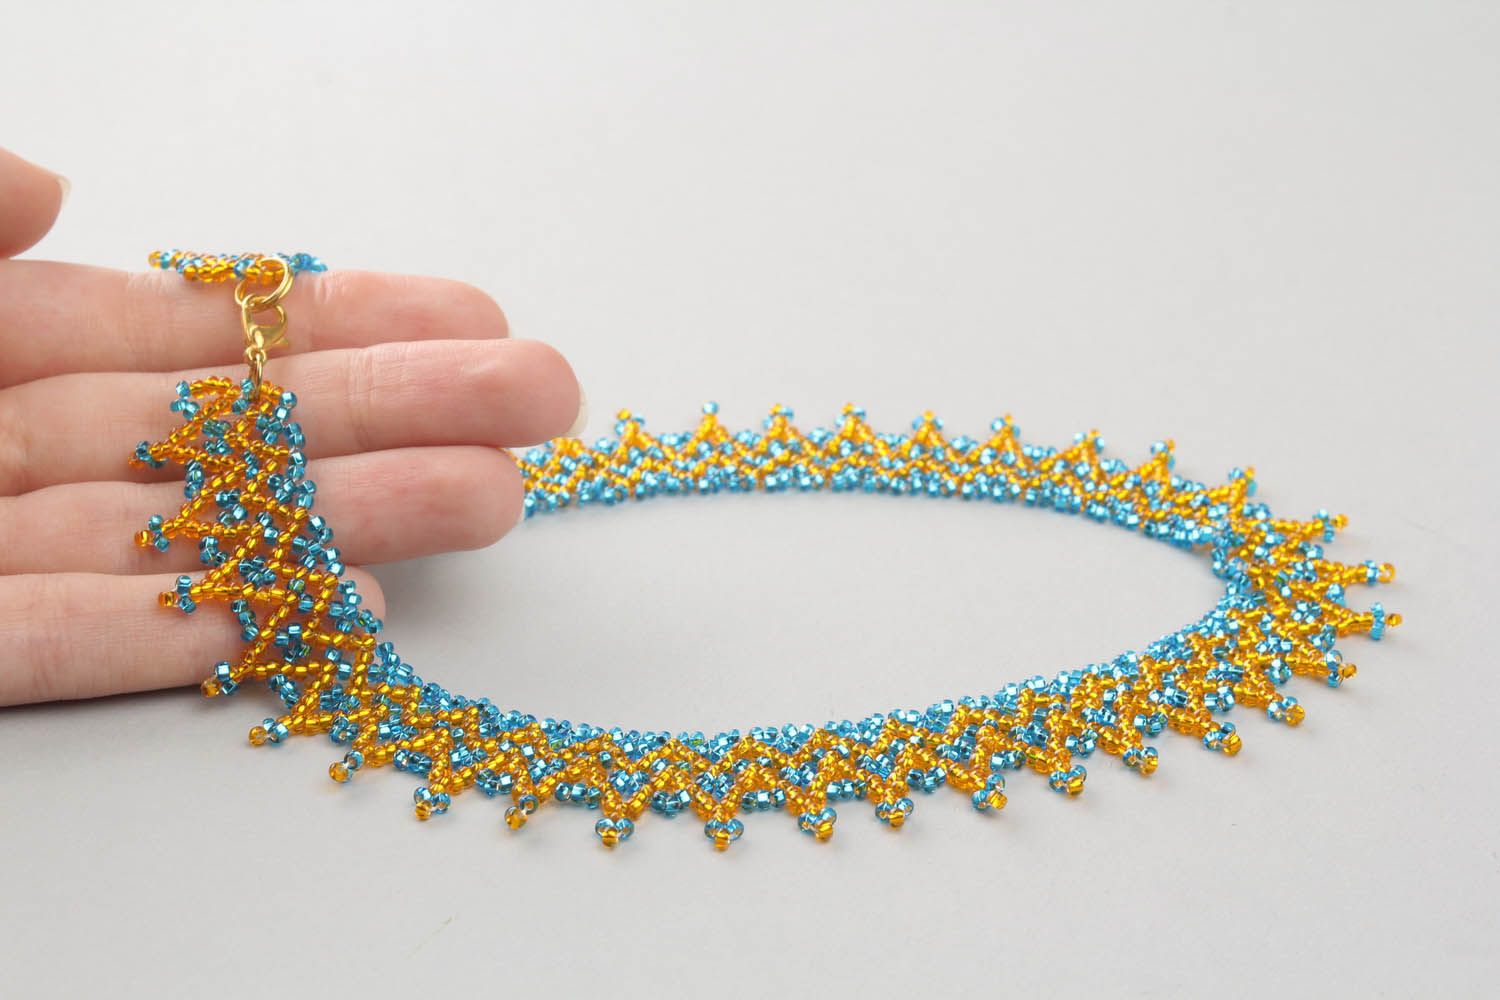 Tender necklace made of beads photo 2